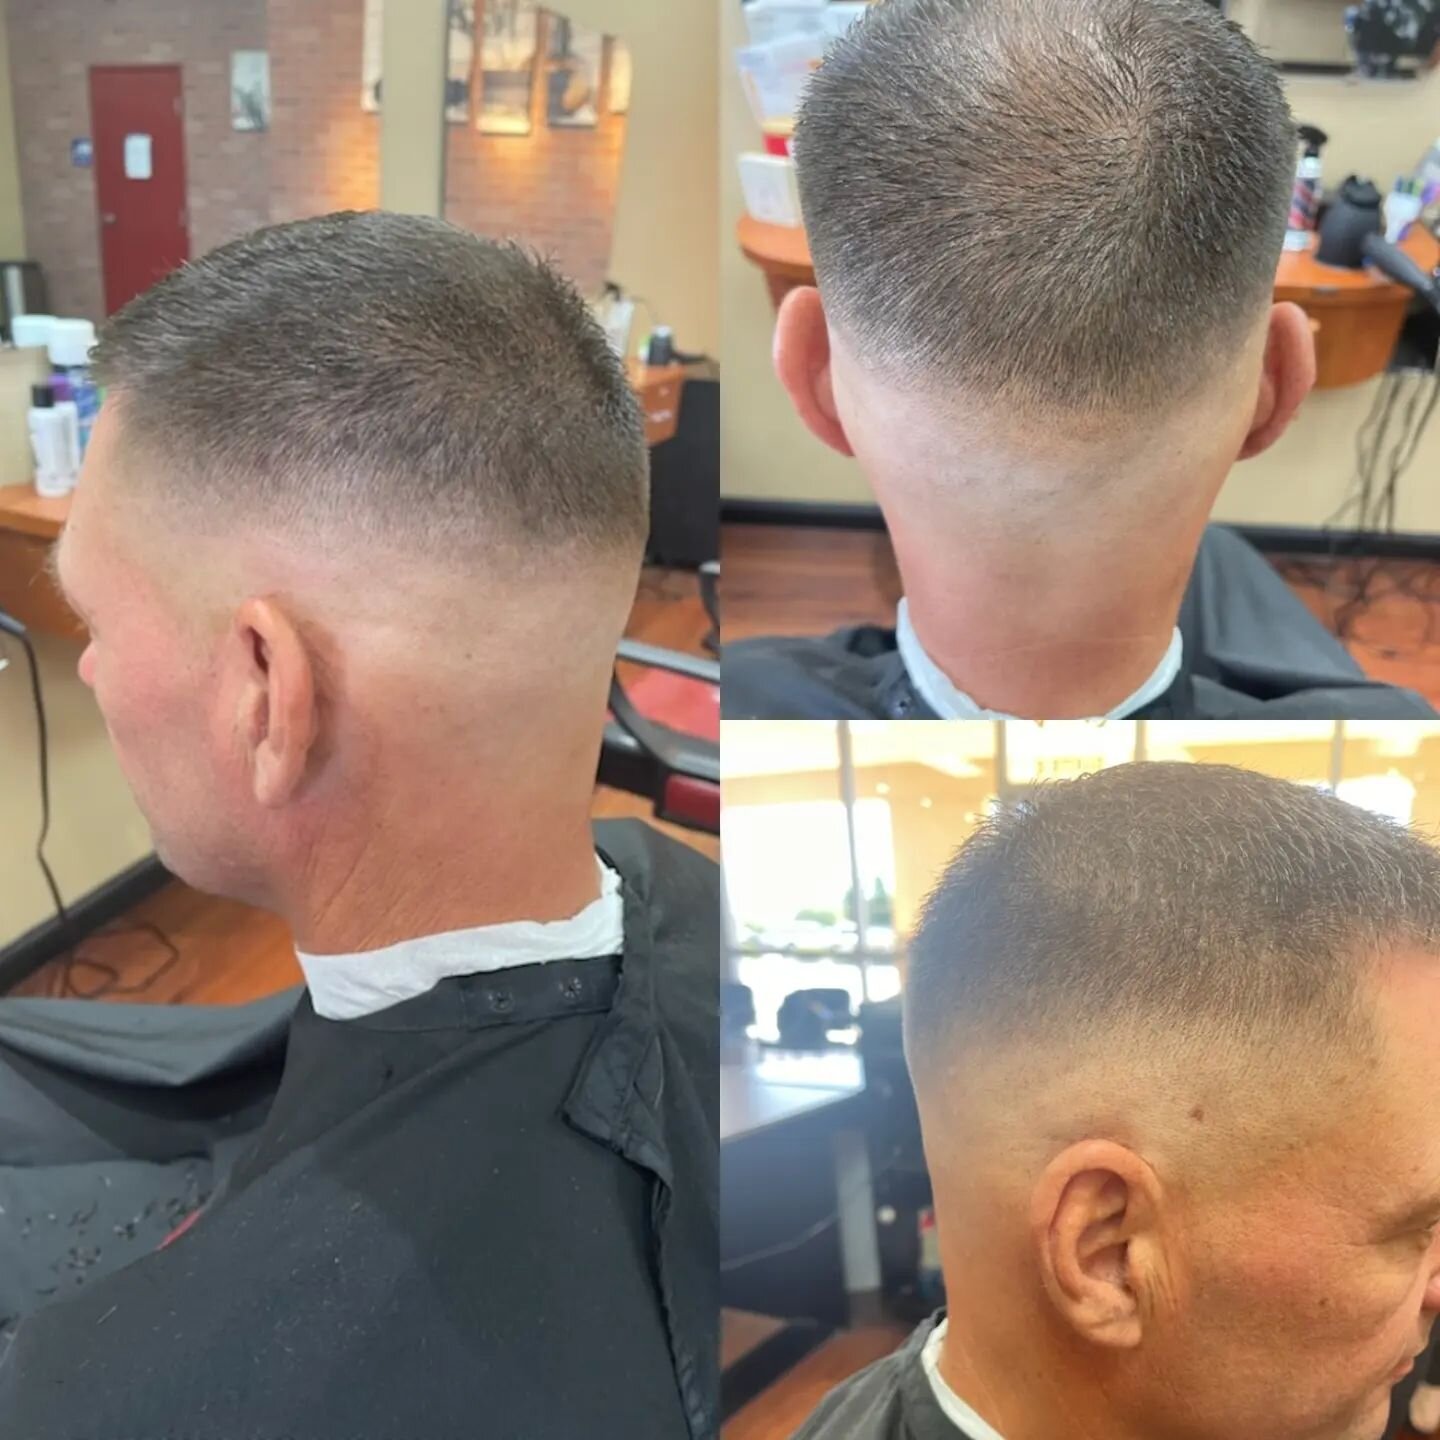 A fresh skin fade by Amy @ #xperthaircuts in Anderson!